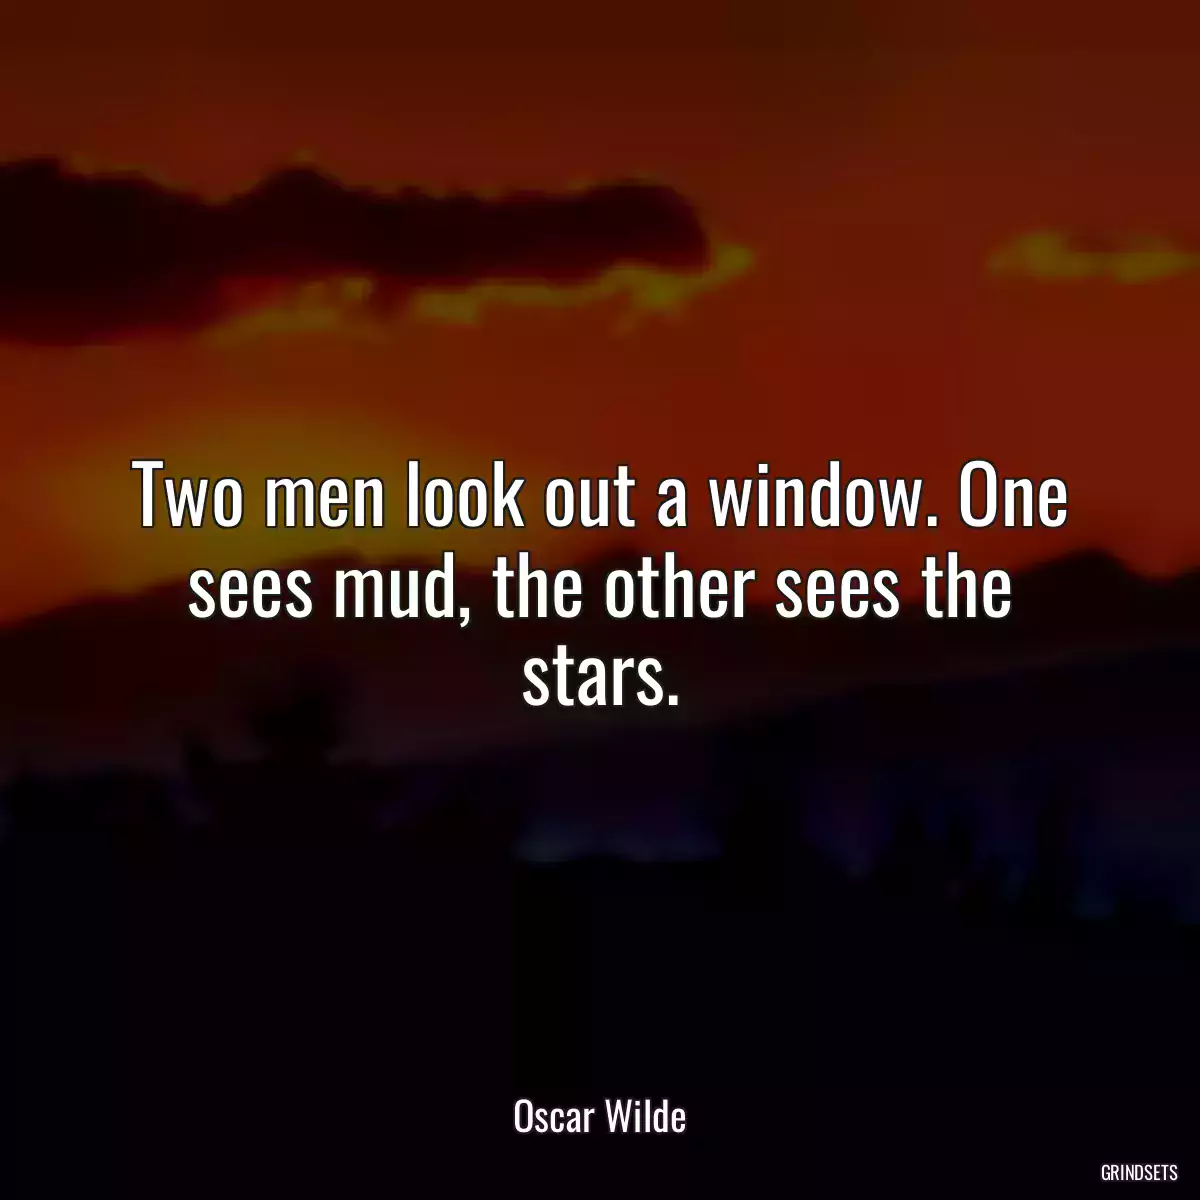 Two men look out a window. One sees mud, the other sees the stars.